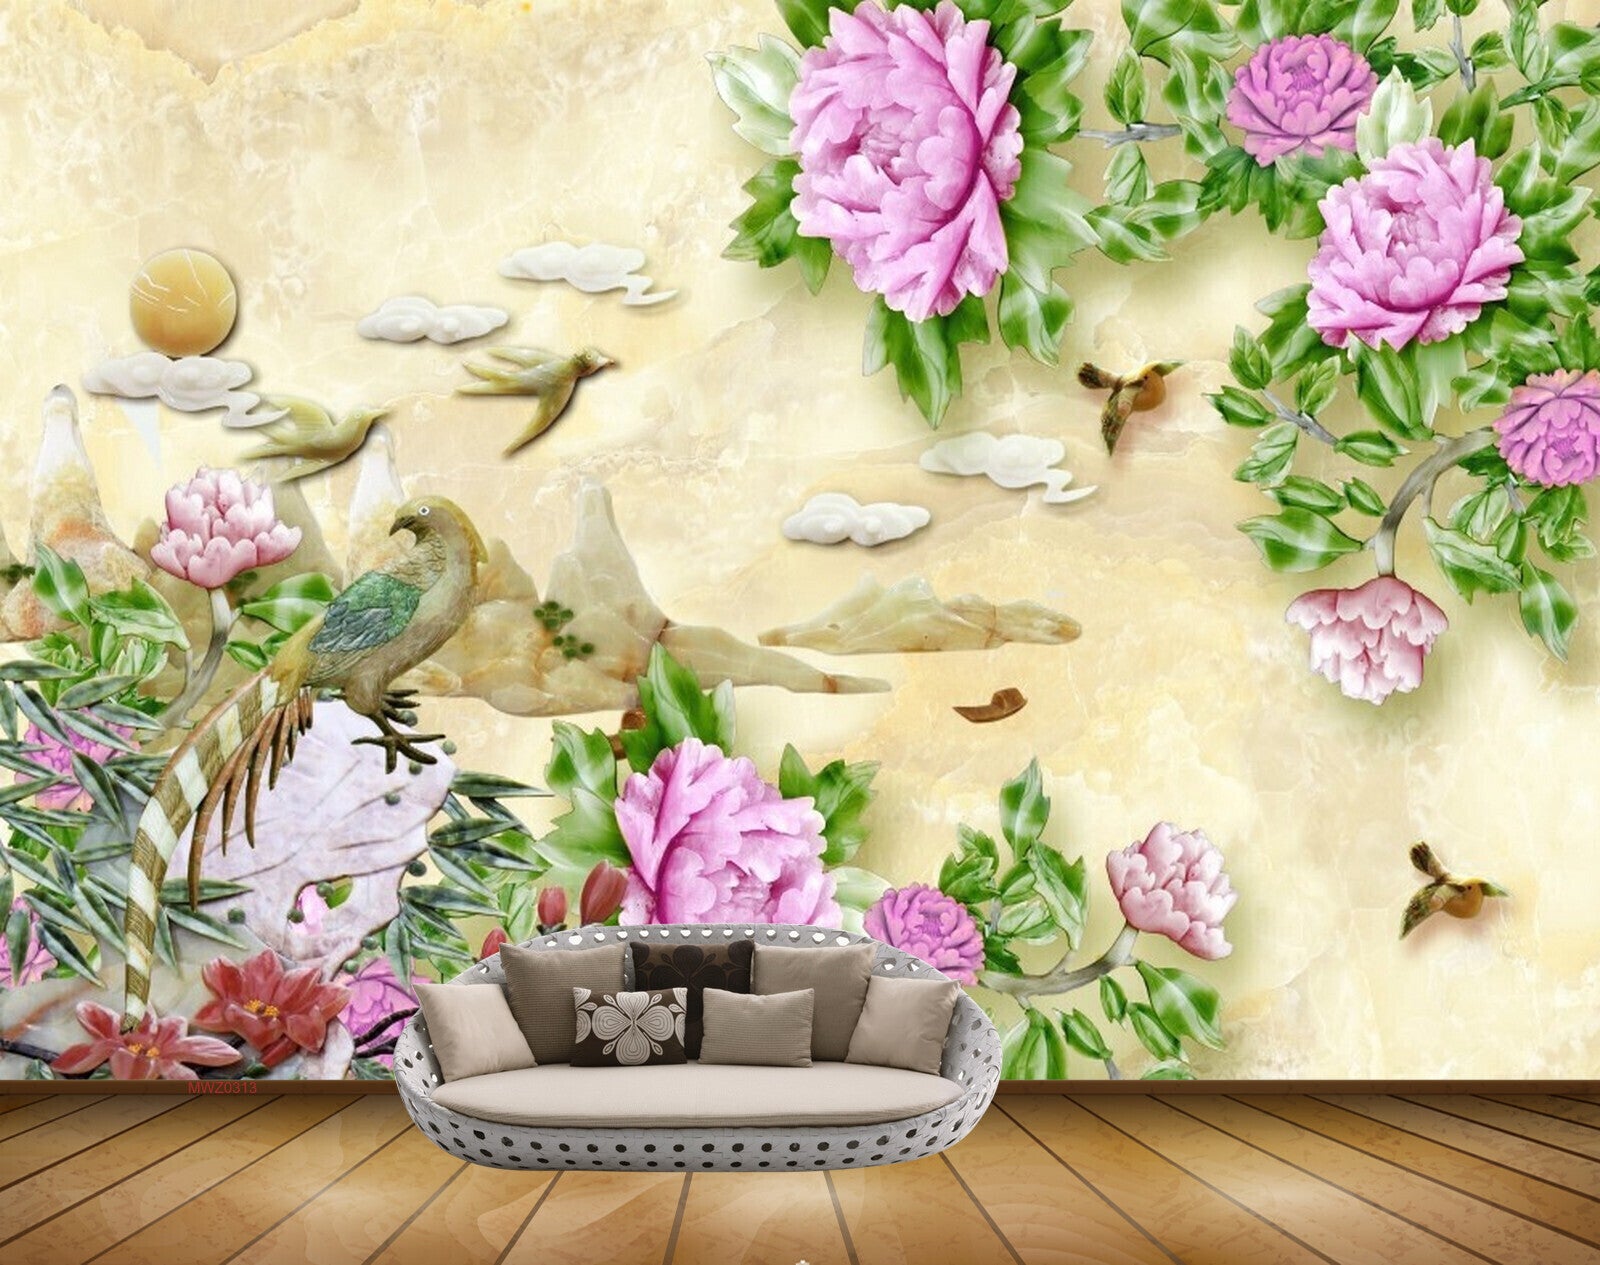 Premium AI Image  A bird on a flower wallpaper with a colorful bird on it